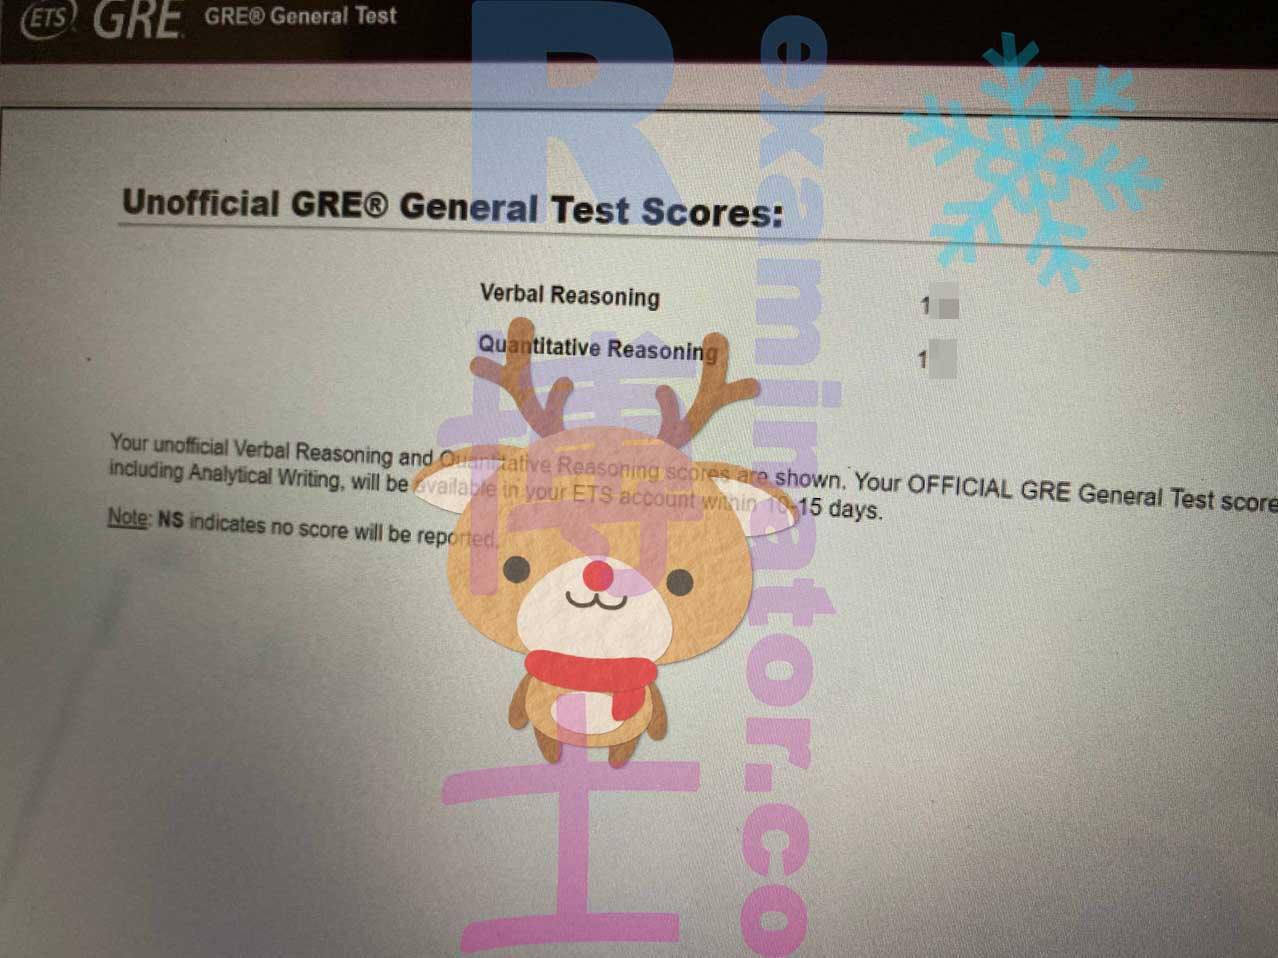 score image for GRE Cheating success story #413